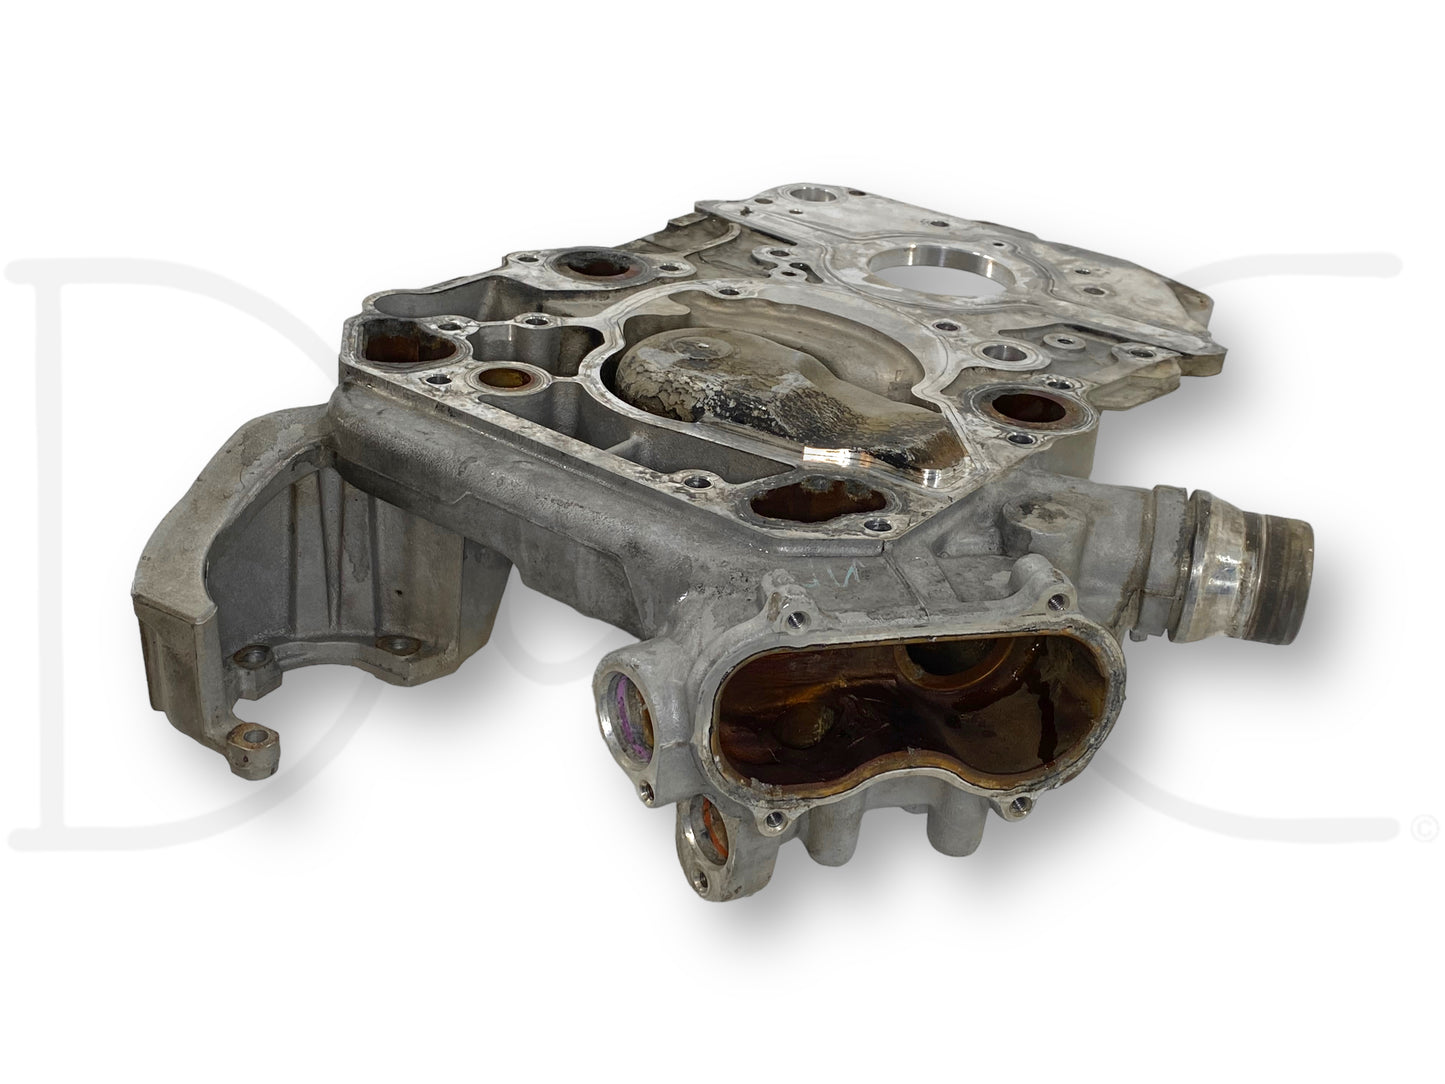 08-10 Ford F250 F350 6.4 6.4L Diesel Front Timing Cover Housing OE *Blem*